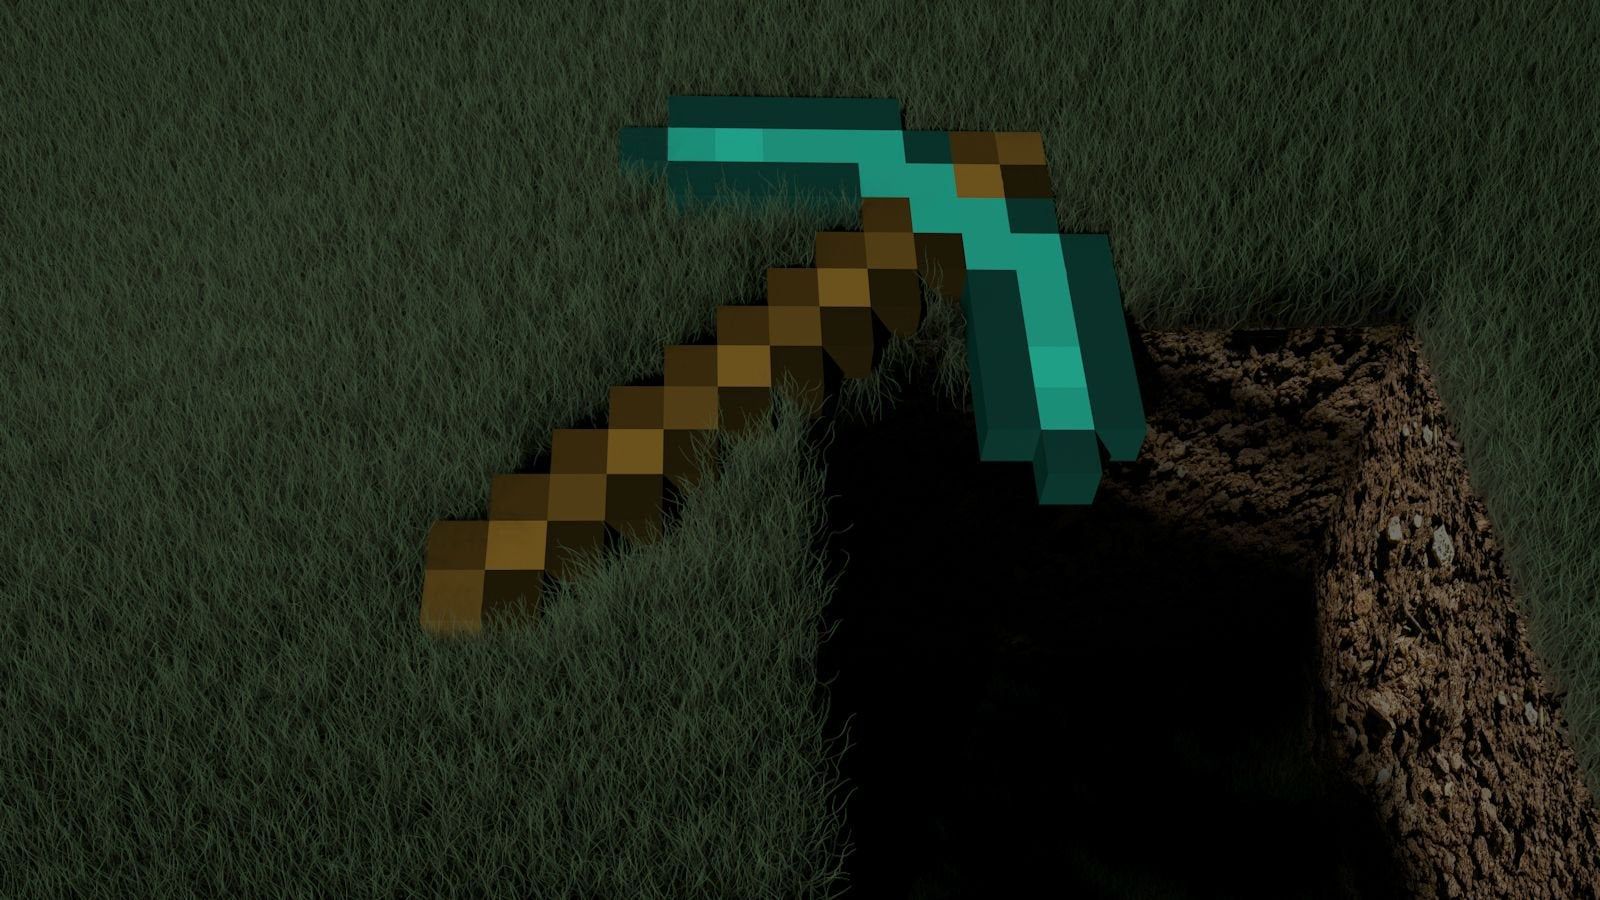 My less lazy diamond pickaxe wallpaper in Cinema 4D (you guys are hard to please)